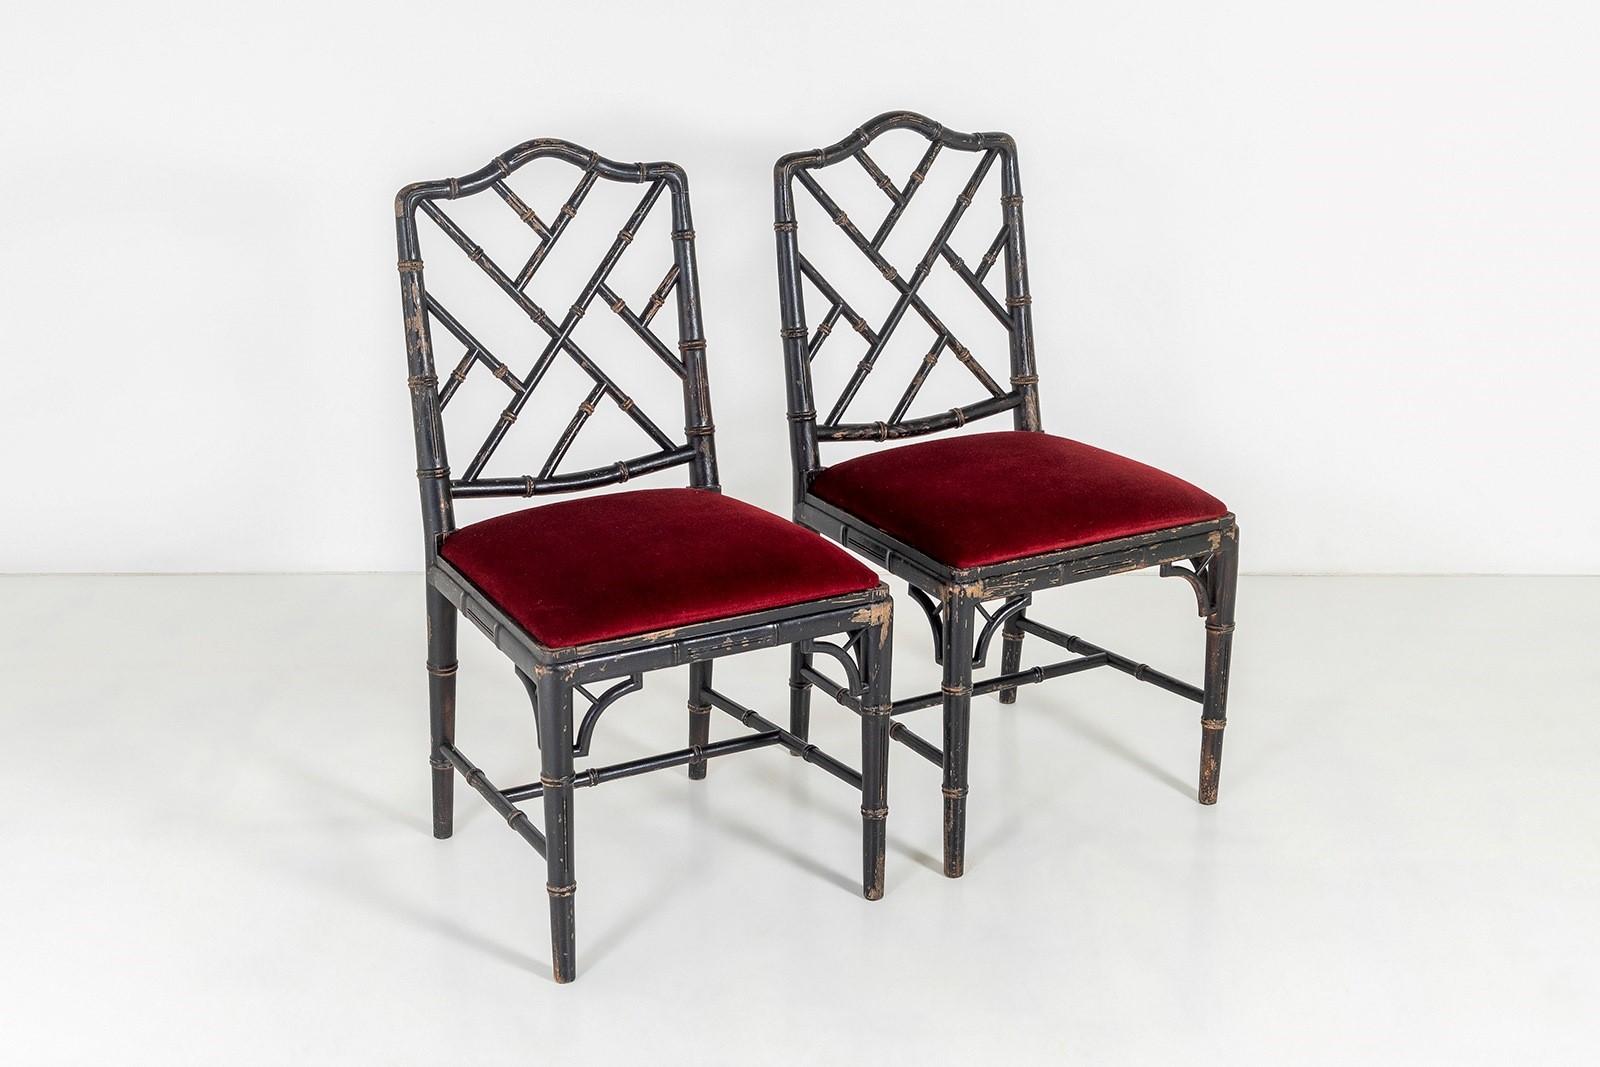 A charming pair of faux bamboo Chinese Chippendale style chairs in a distressed ebonised finish with deep red velvet fabric seat.
A pair of chairs of good character, these vintage examples have a great decorative charm with worn patina. Great